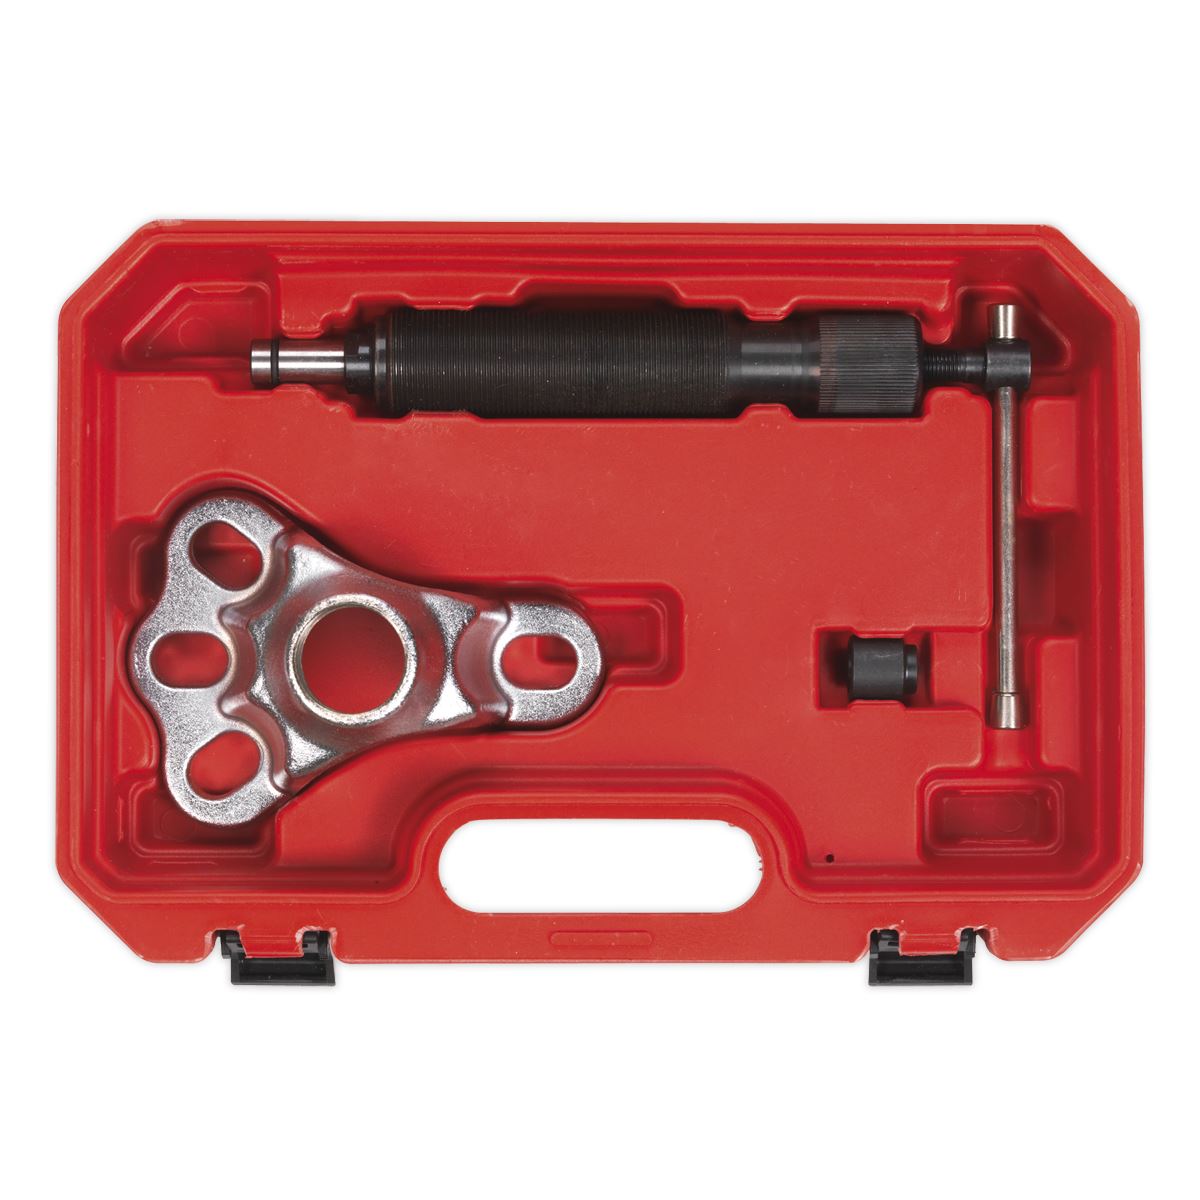 Sealey Hydraulic Hub Puller Set 10 Tonne Ram for Four and Five Stud Hubs